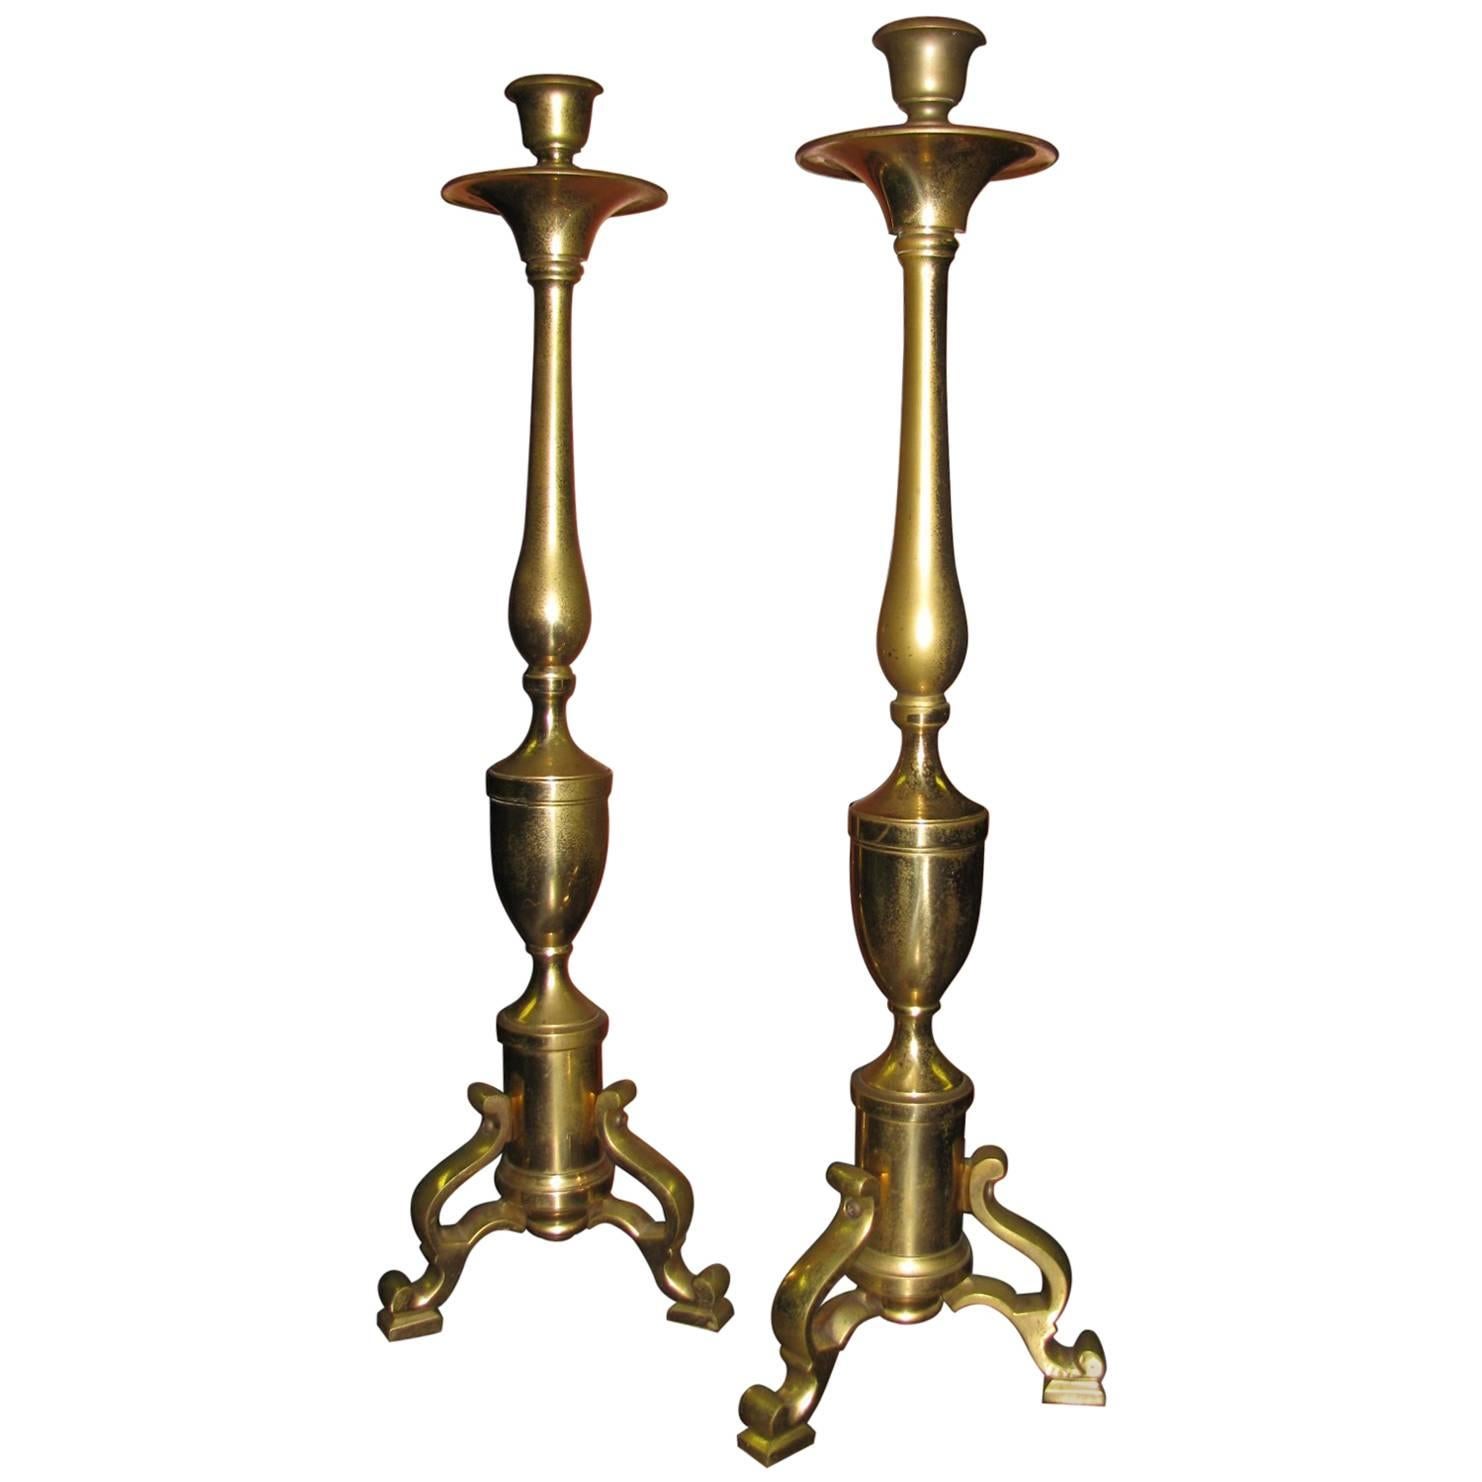 Pair of Tall Neoclassical Brass Candleholders